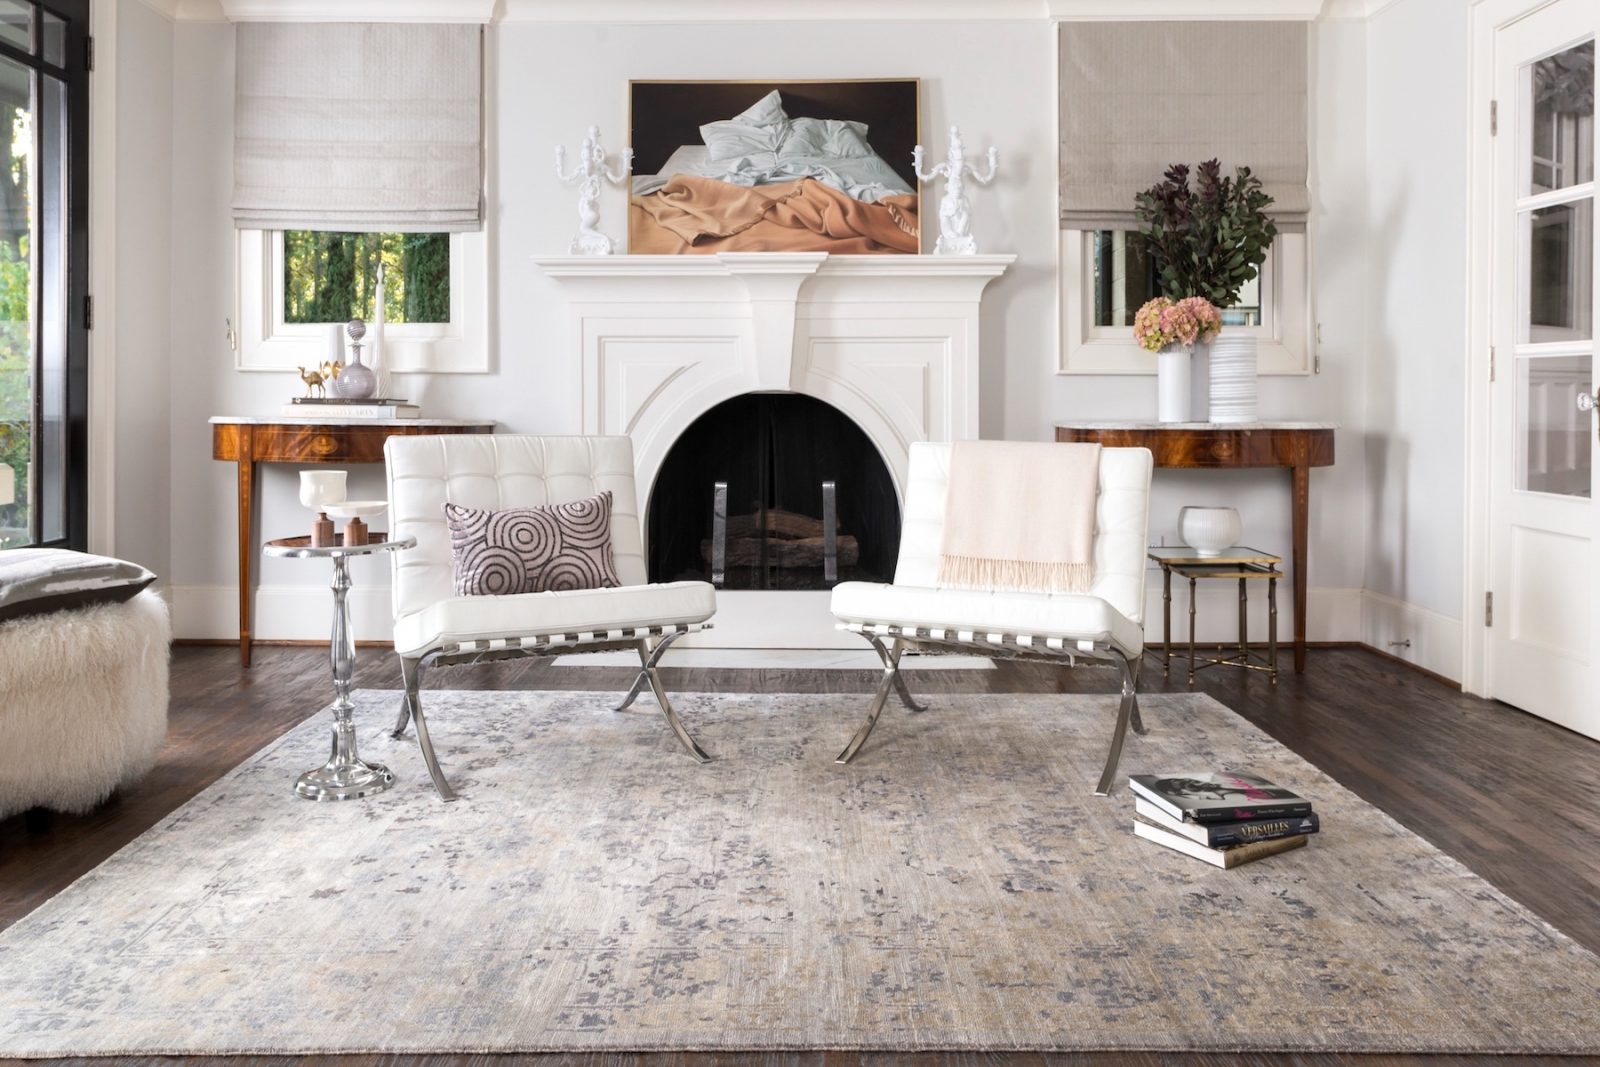 How To Get White Rug White Again